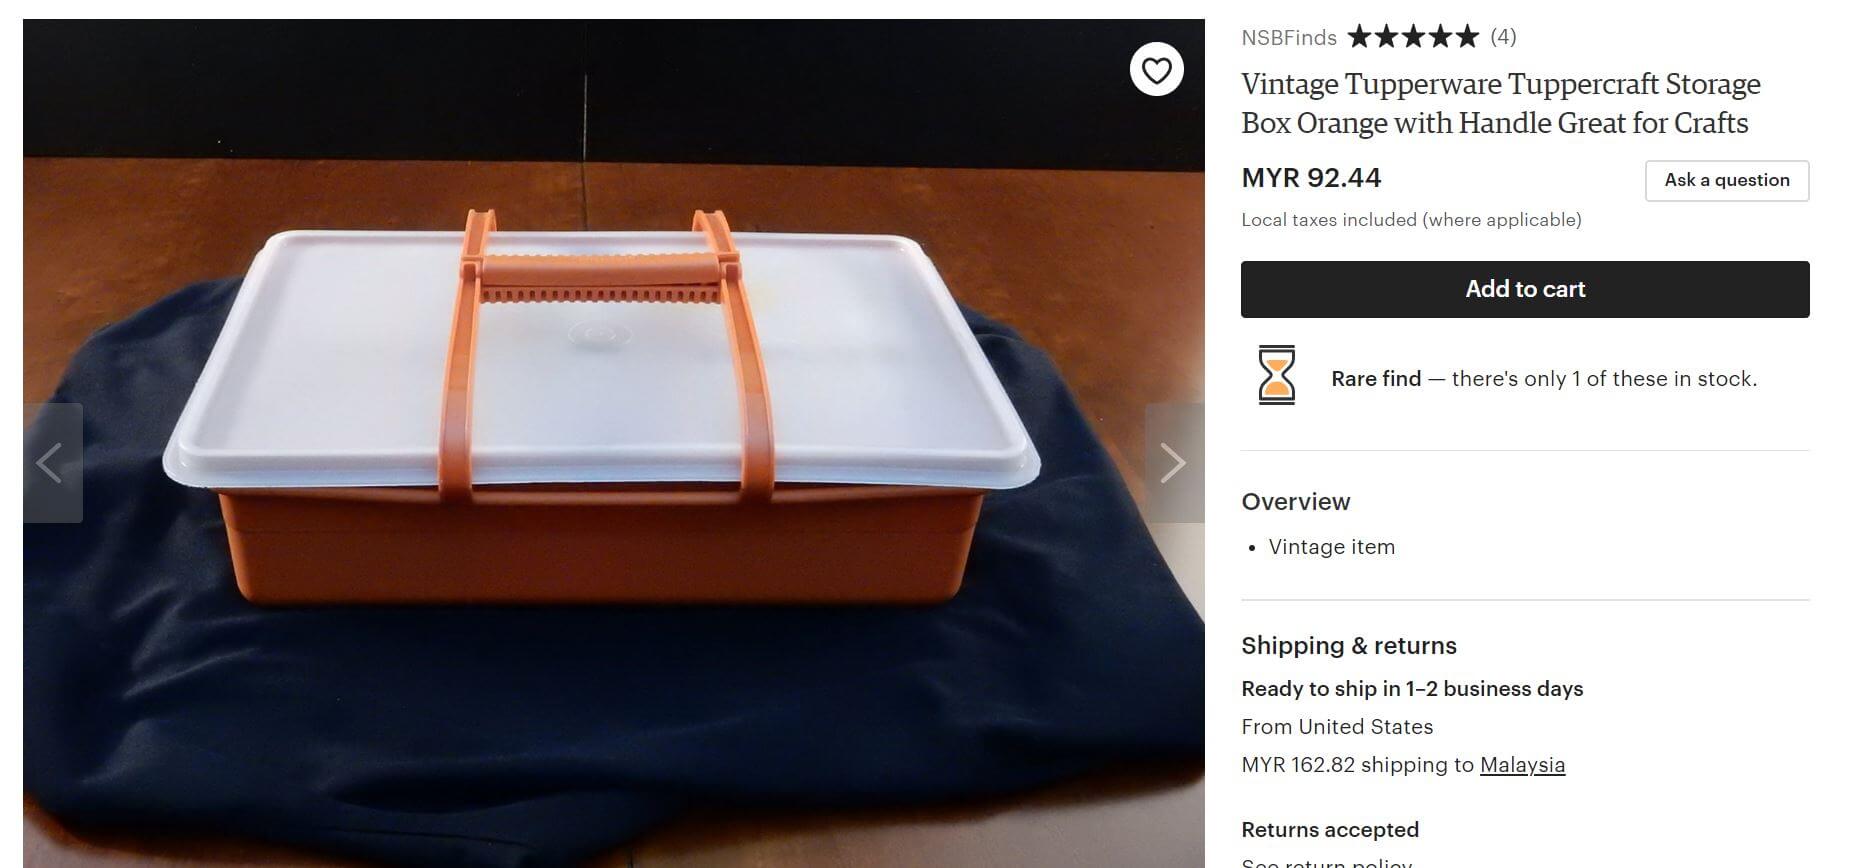 Your Mum's Tupperware Might Be Worth Hundreds of Ringgit On Etsy and eBay! - WORLD OF BUZZ 2